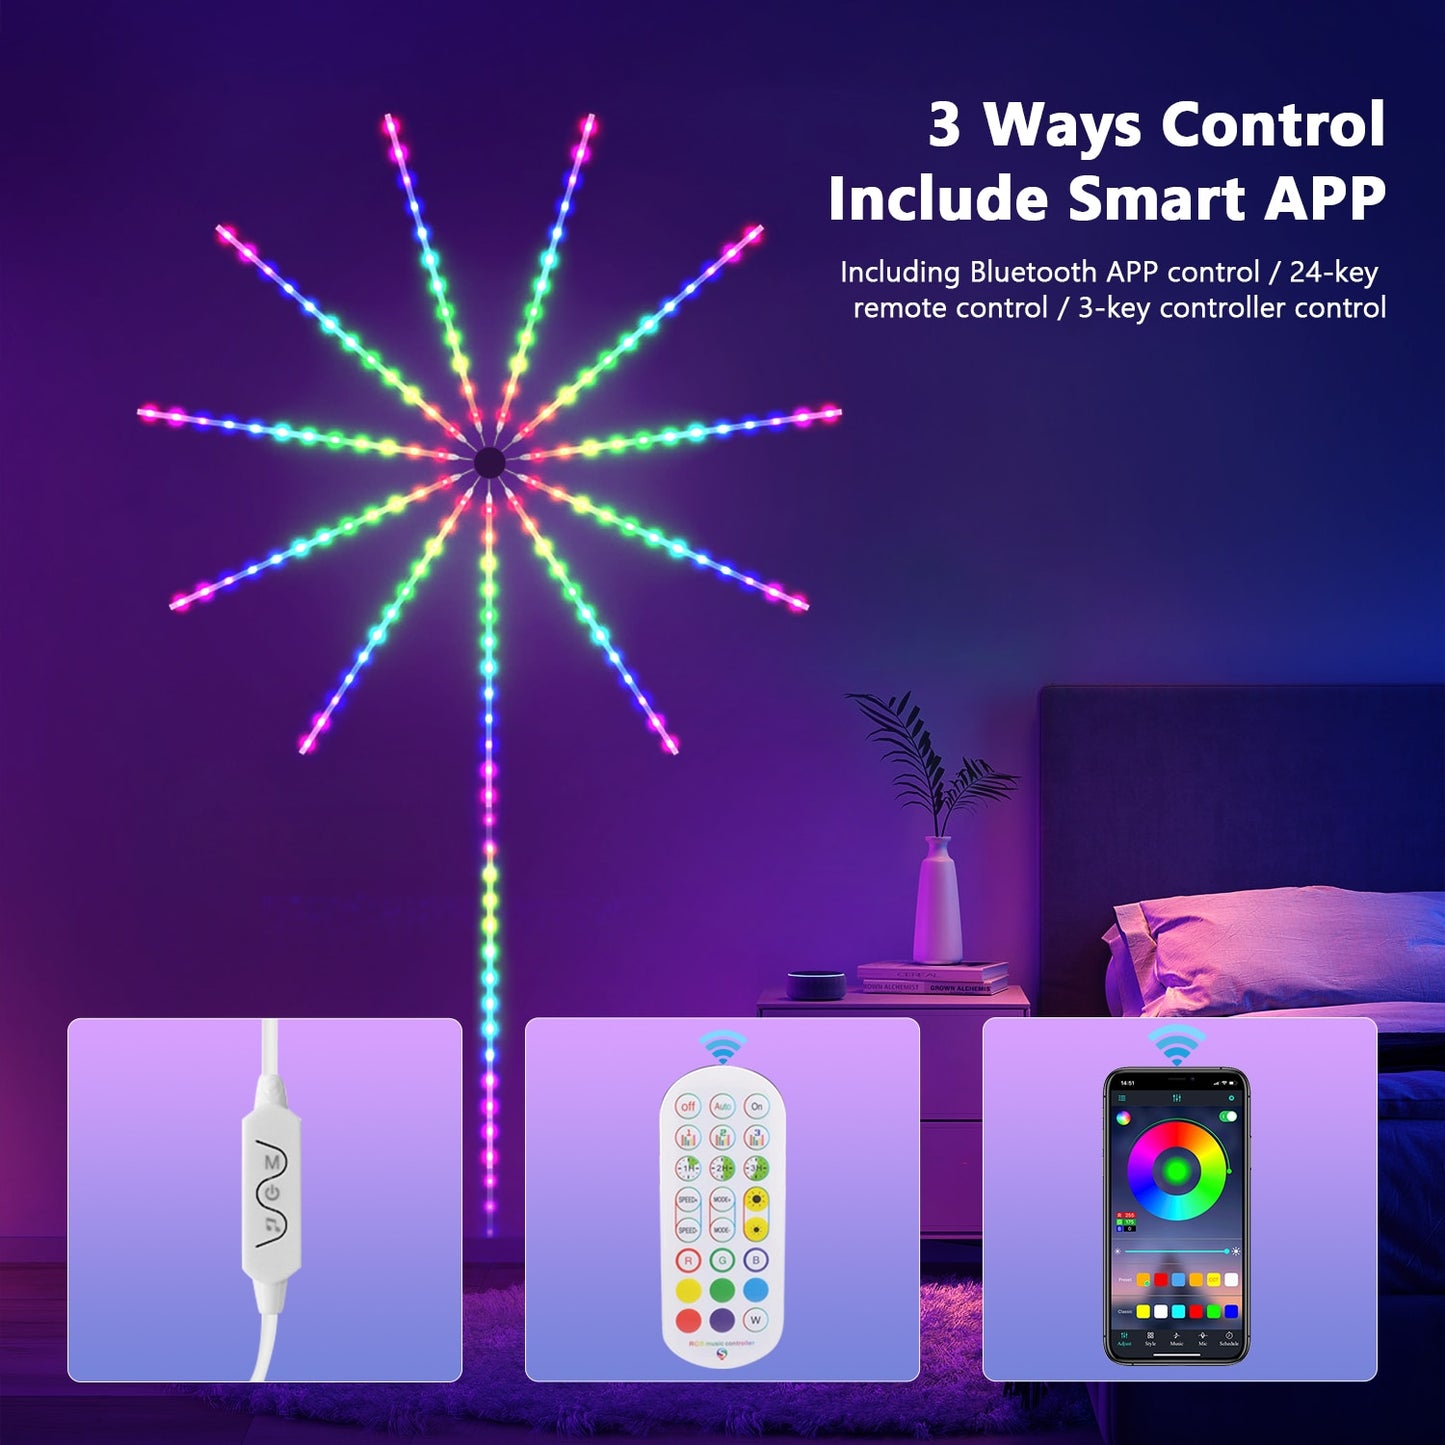 Firework Lights LED Strip Music Sound Sync Color Changing Remote Control